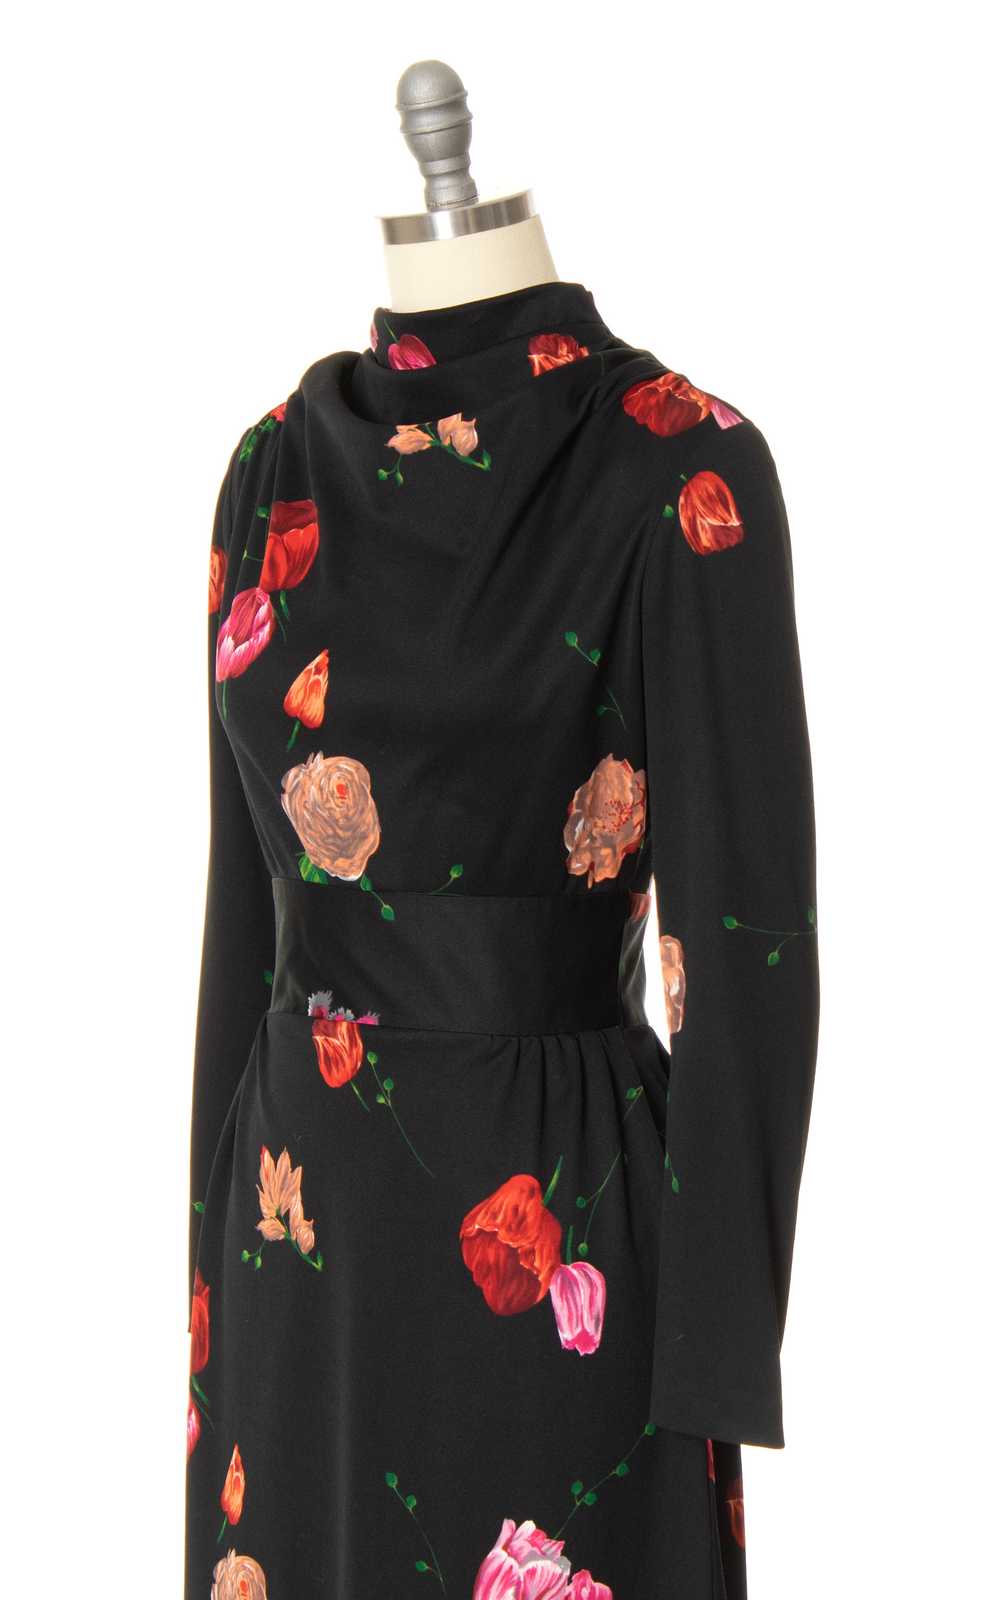 1970s Floral Jersey Dress | x-small/small - image 5